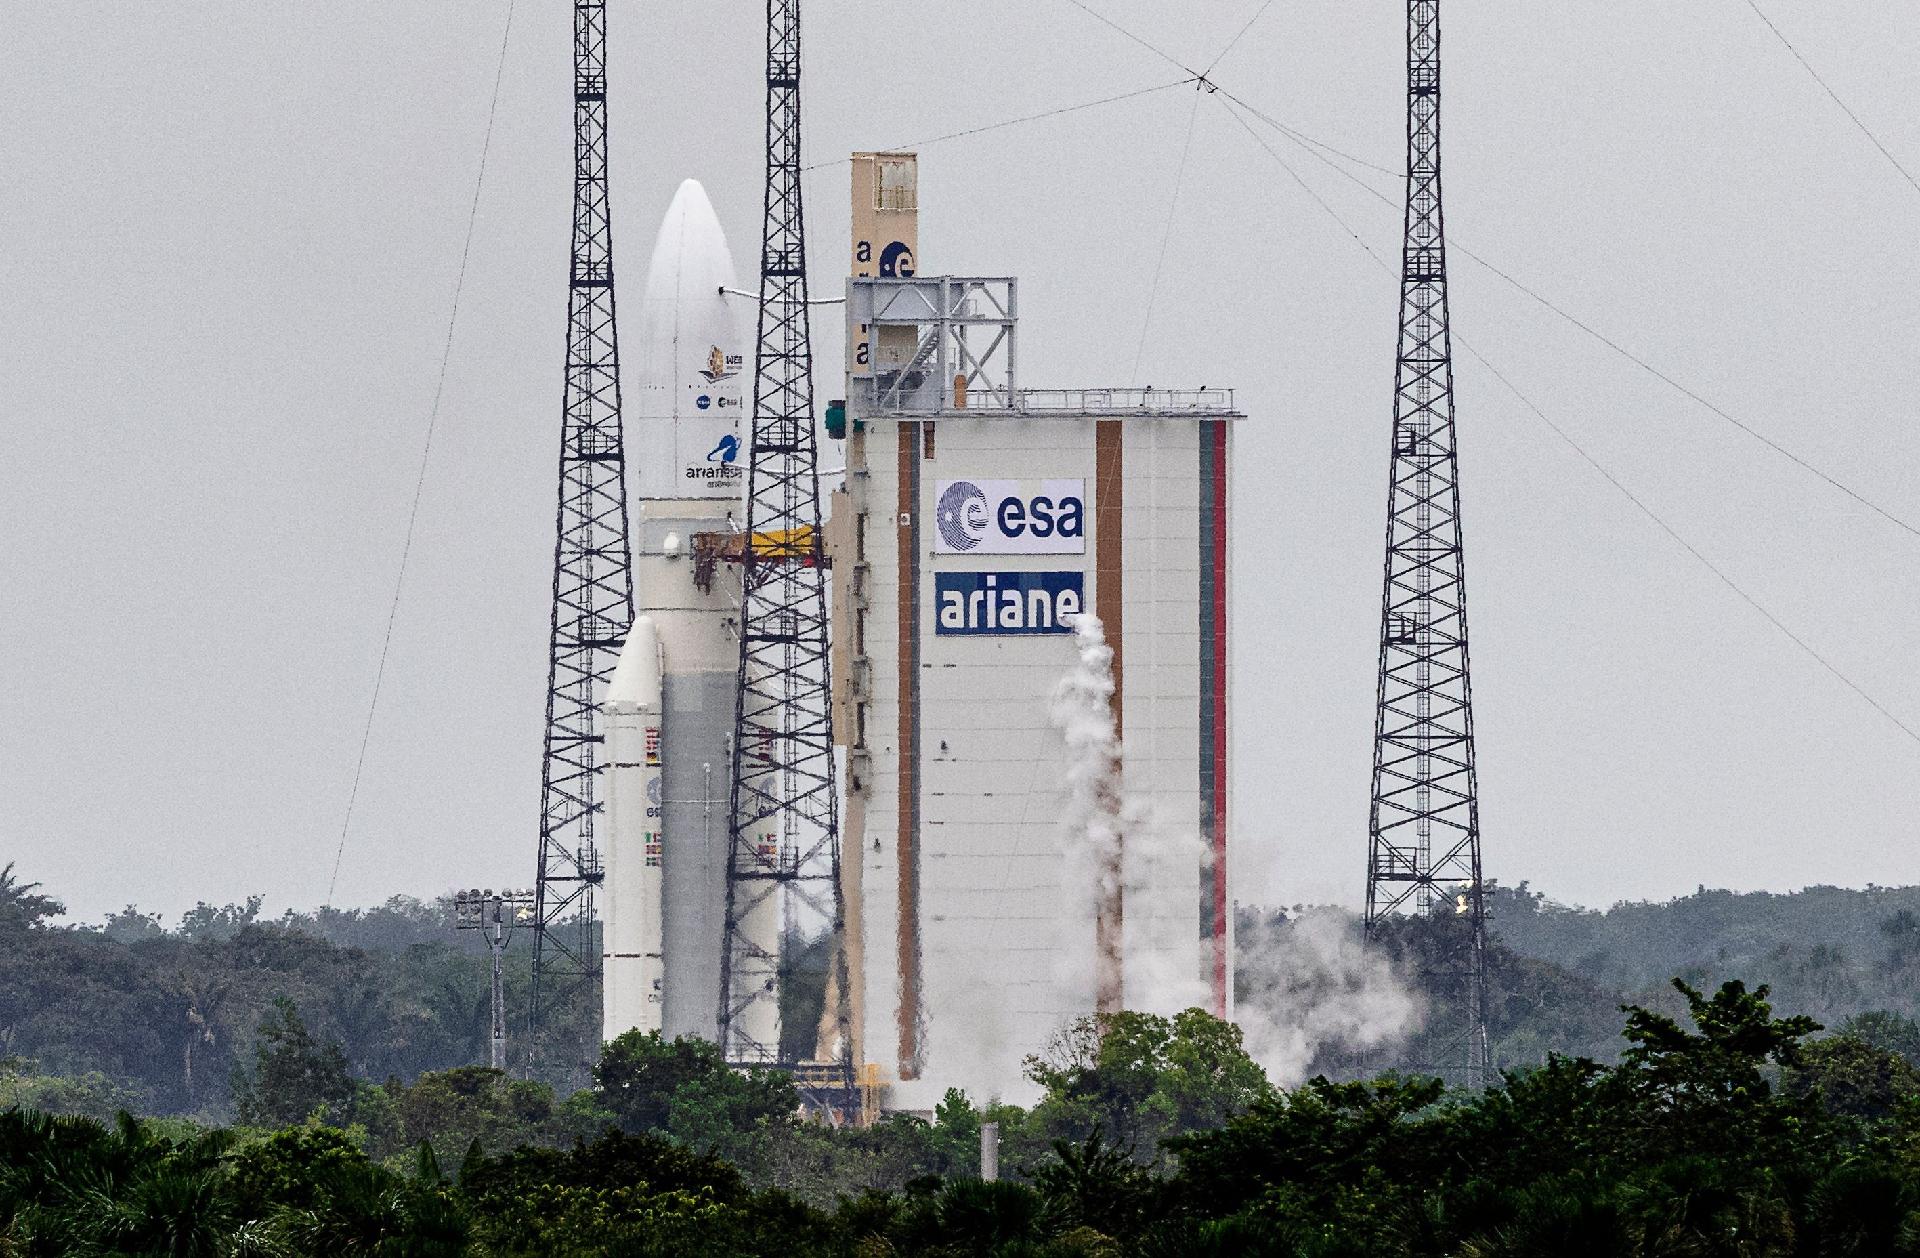 Ariane 5 rocket on launch pad, minutes before final takeoff countdown - jody Amiet/AFP